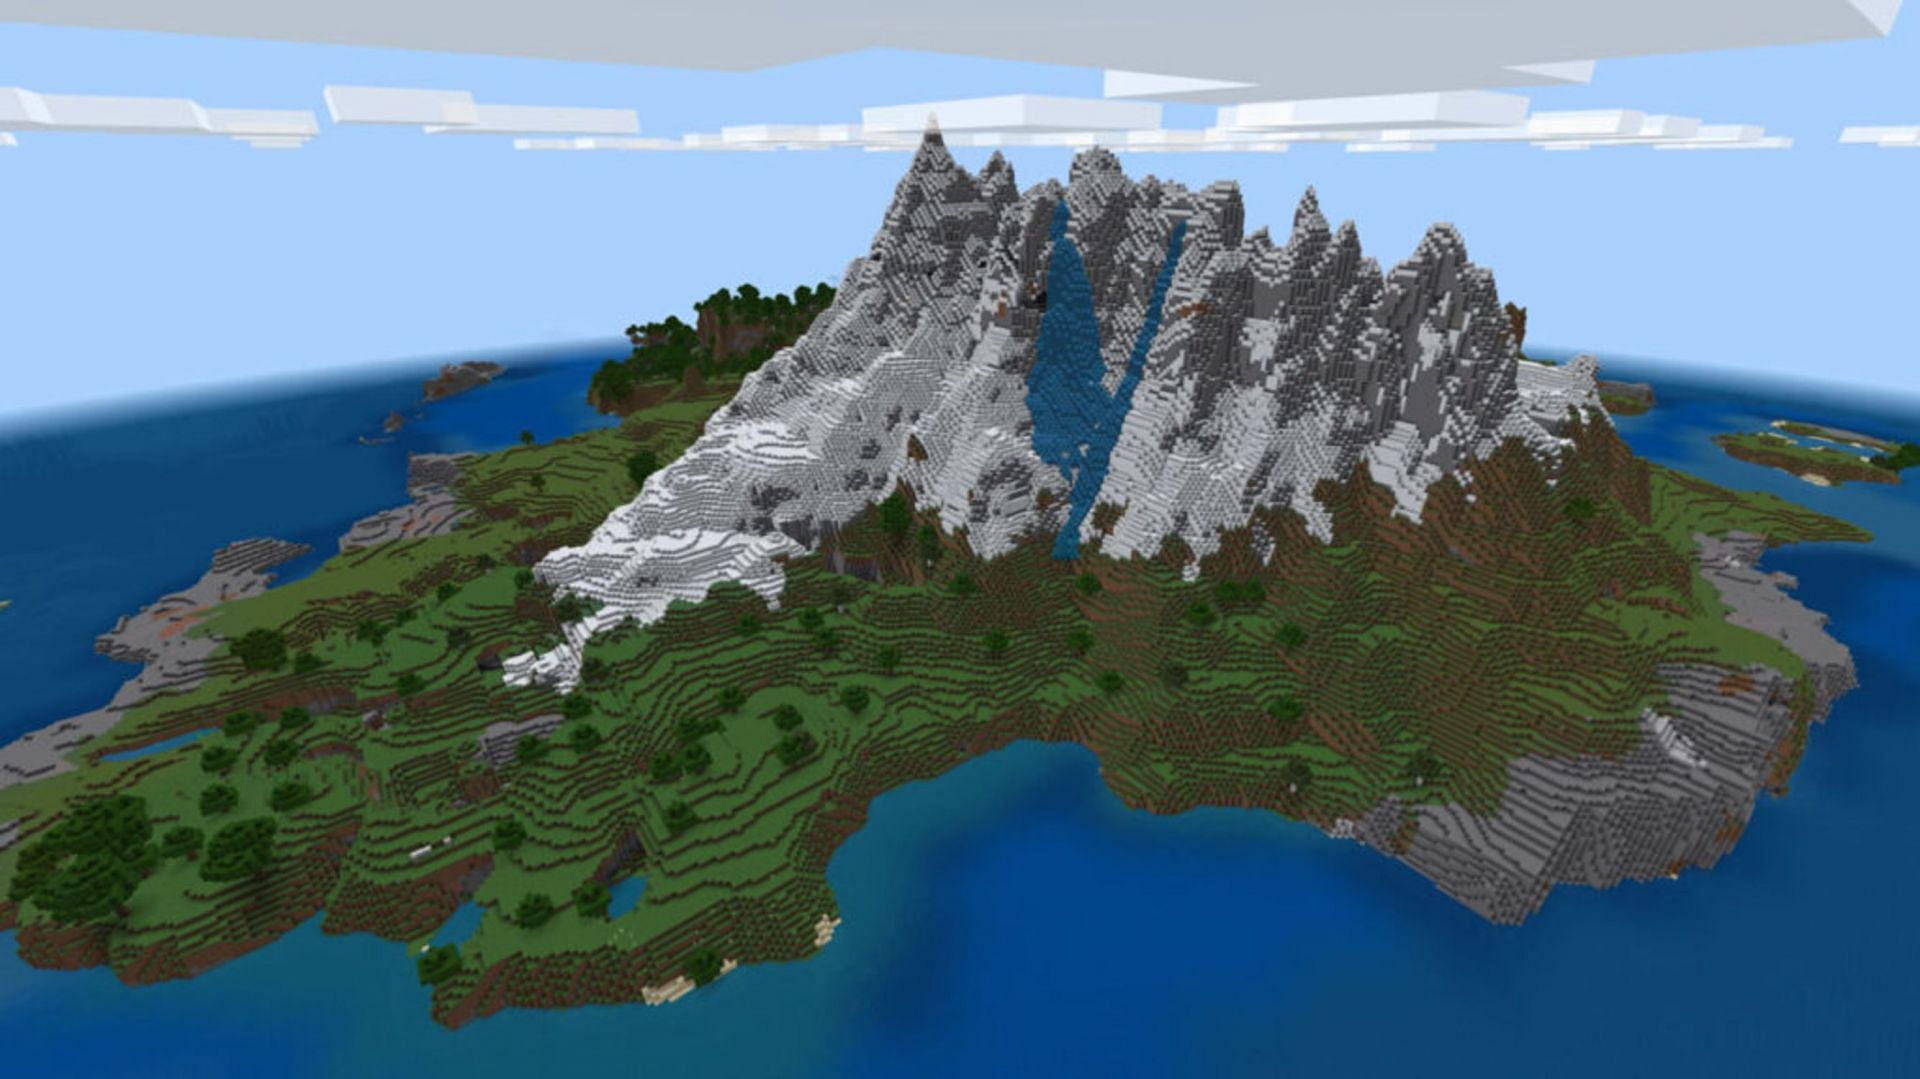 This seed makes for an excellent Survival Island experience (Image via Mojang)